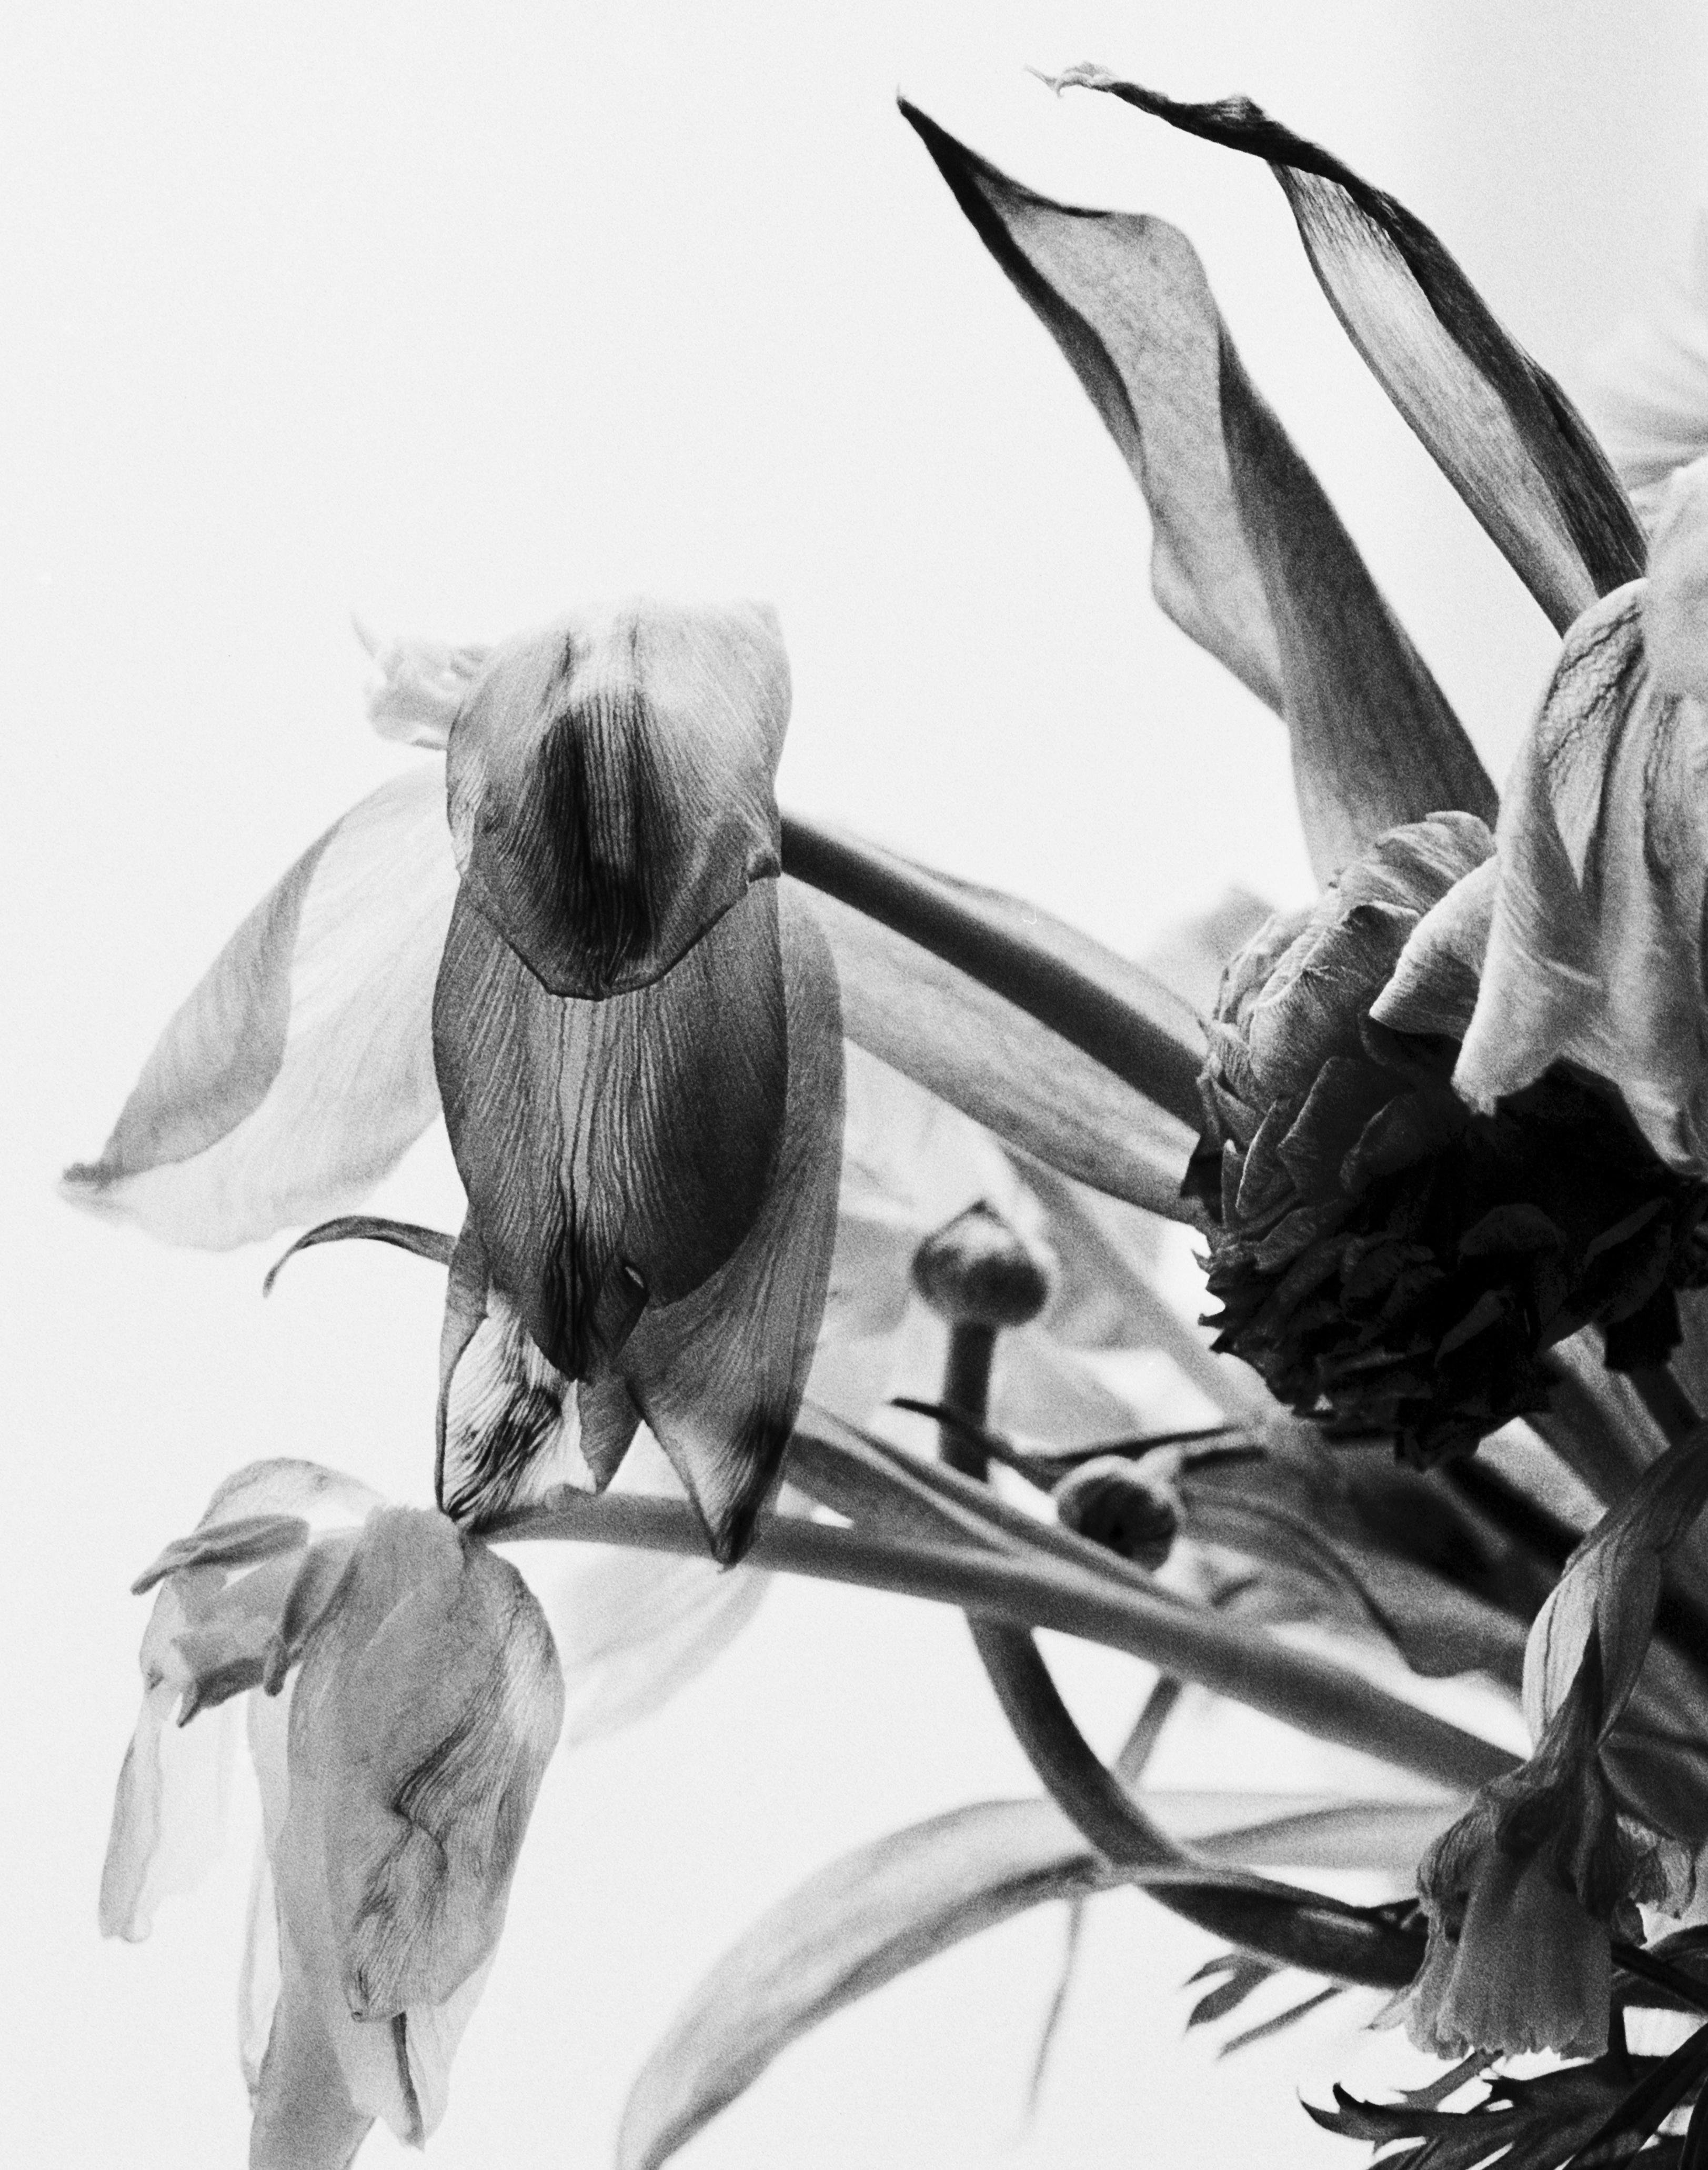 Dead flowers, black and white analogue floral photography, Limited edition of 20 - Photograph by Ugne Pouwell